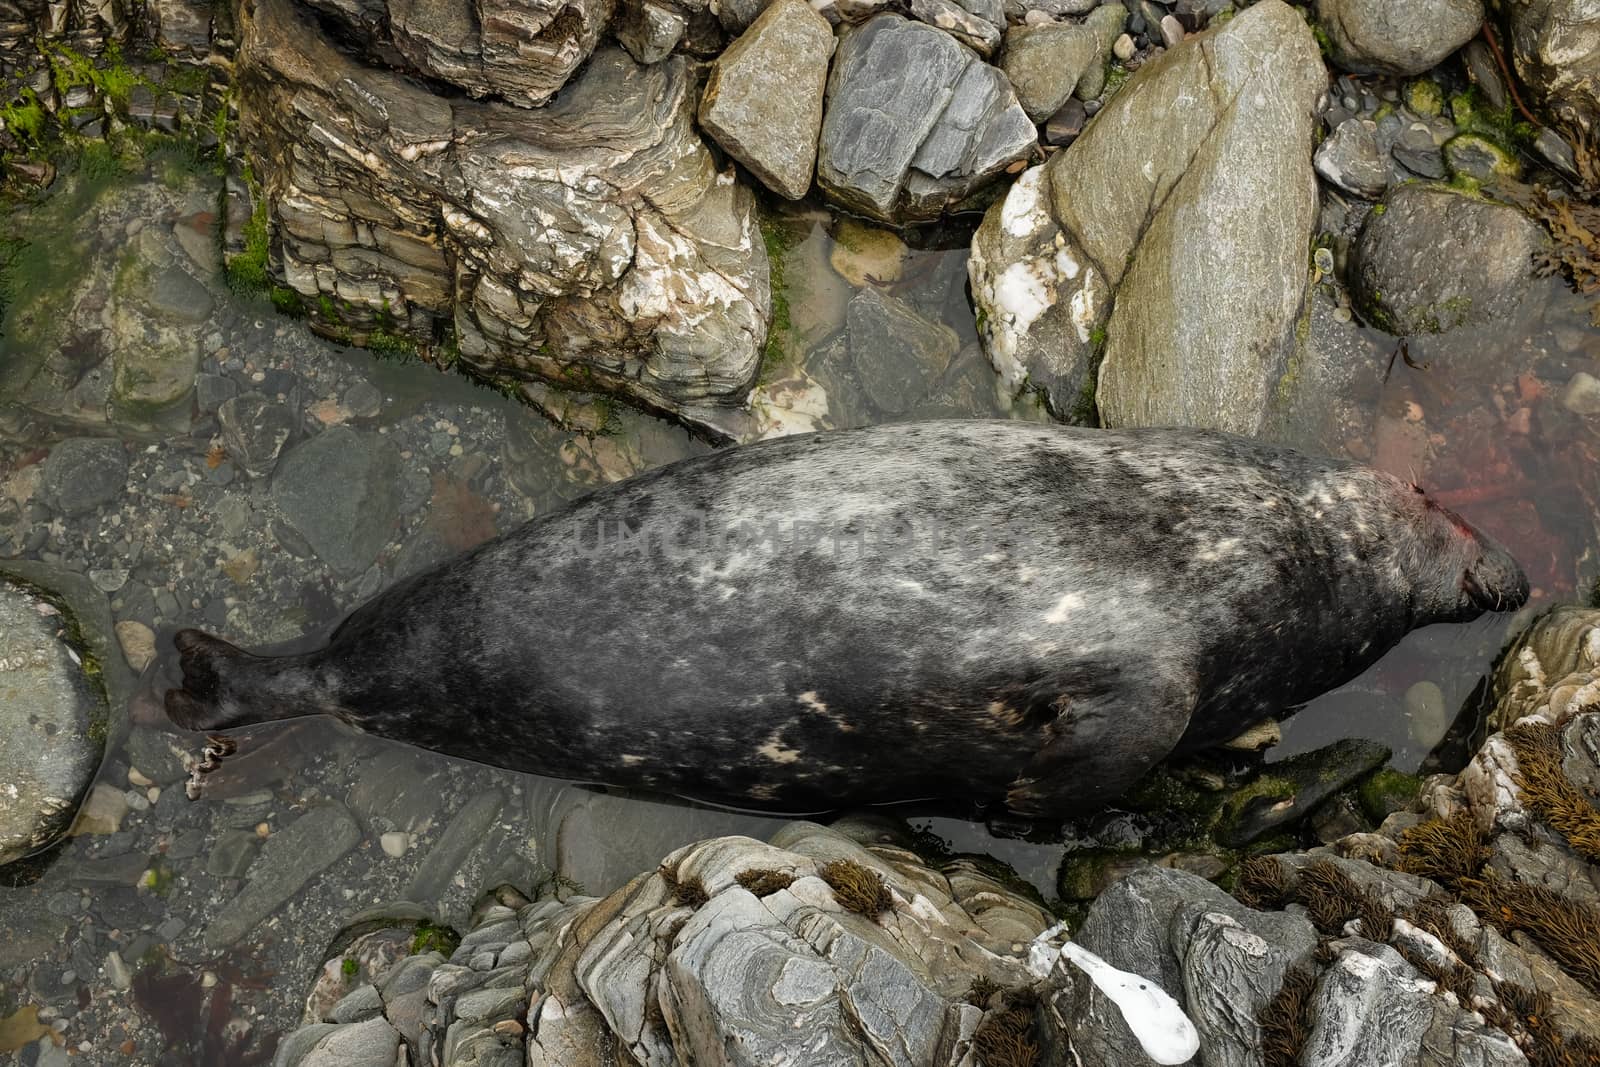 The carcass of a dead bull, grey seal, Halichoerus grypus, in a pool of water between rocks.